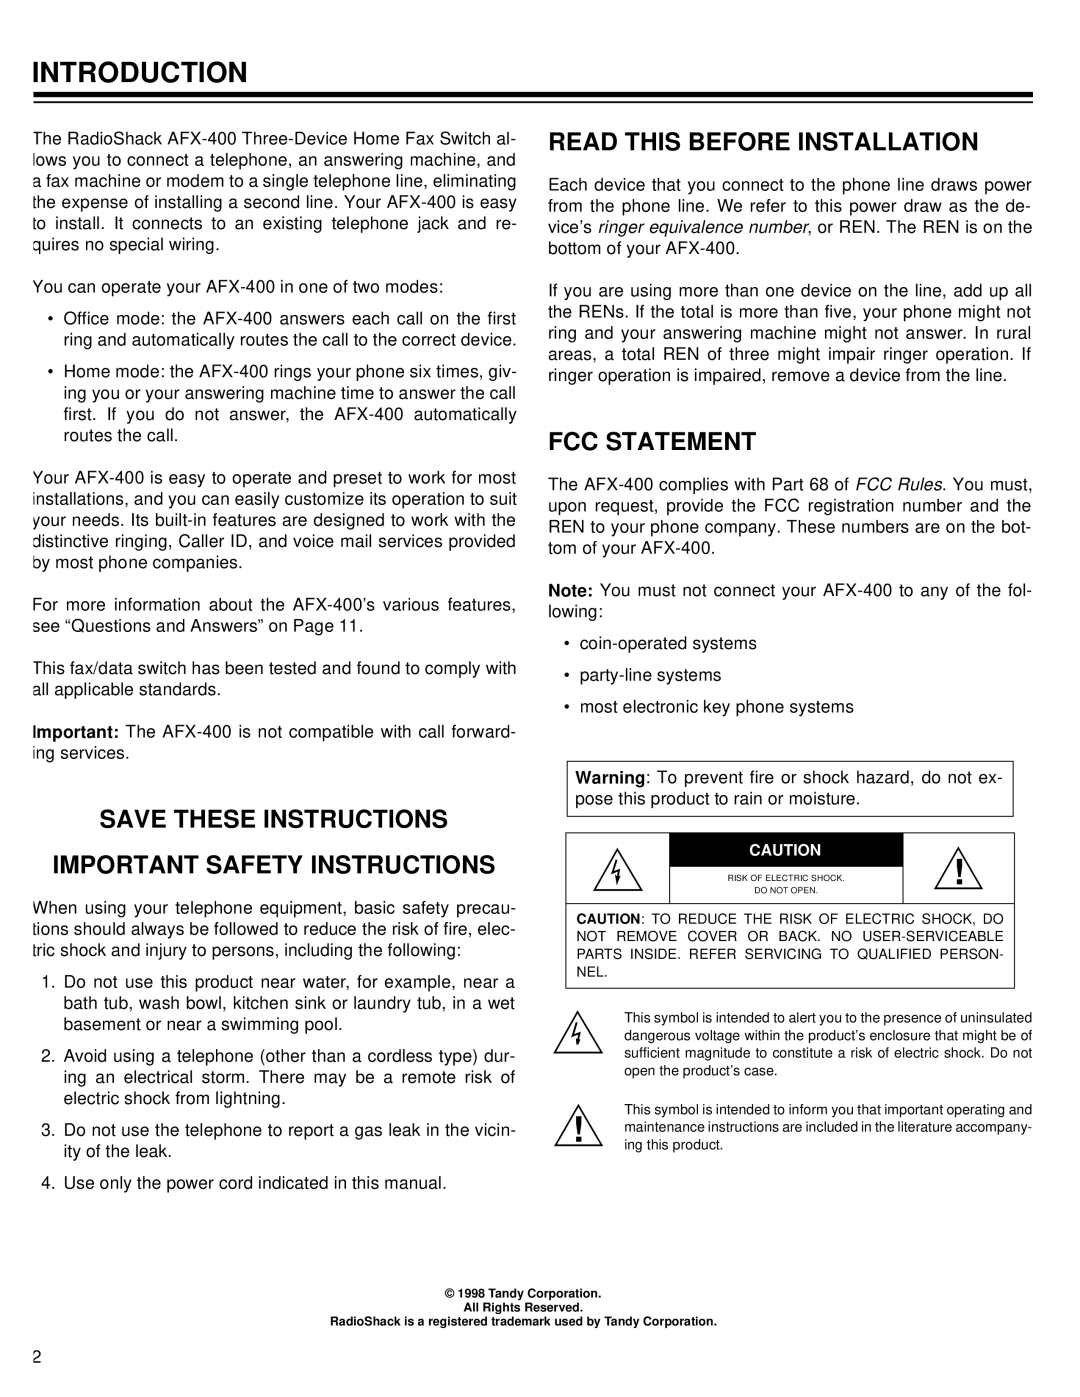 Radio Shack AFX-400 Introduction, Save These Instructions Important Safety Instructions, Read This Before Installation 